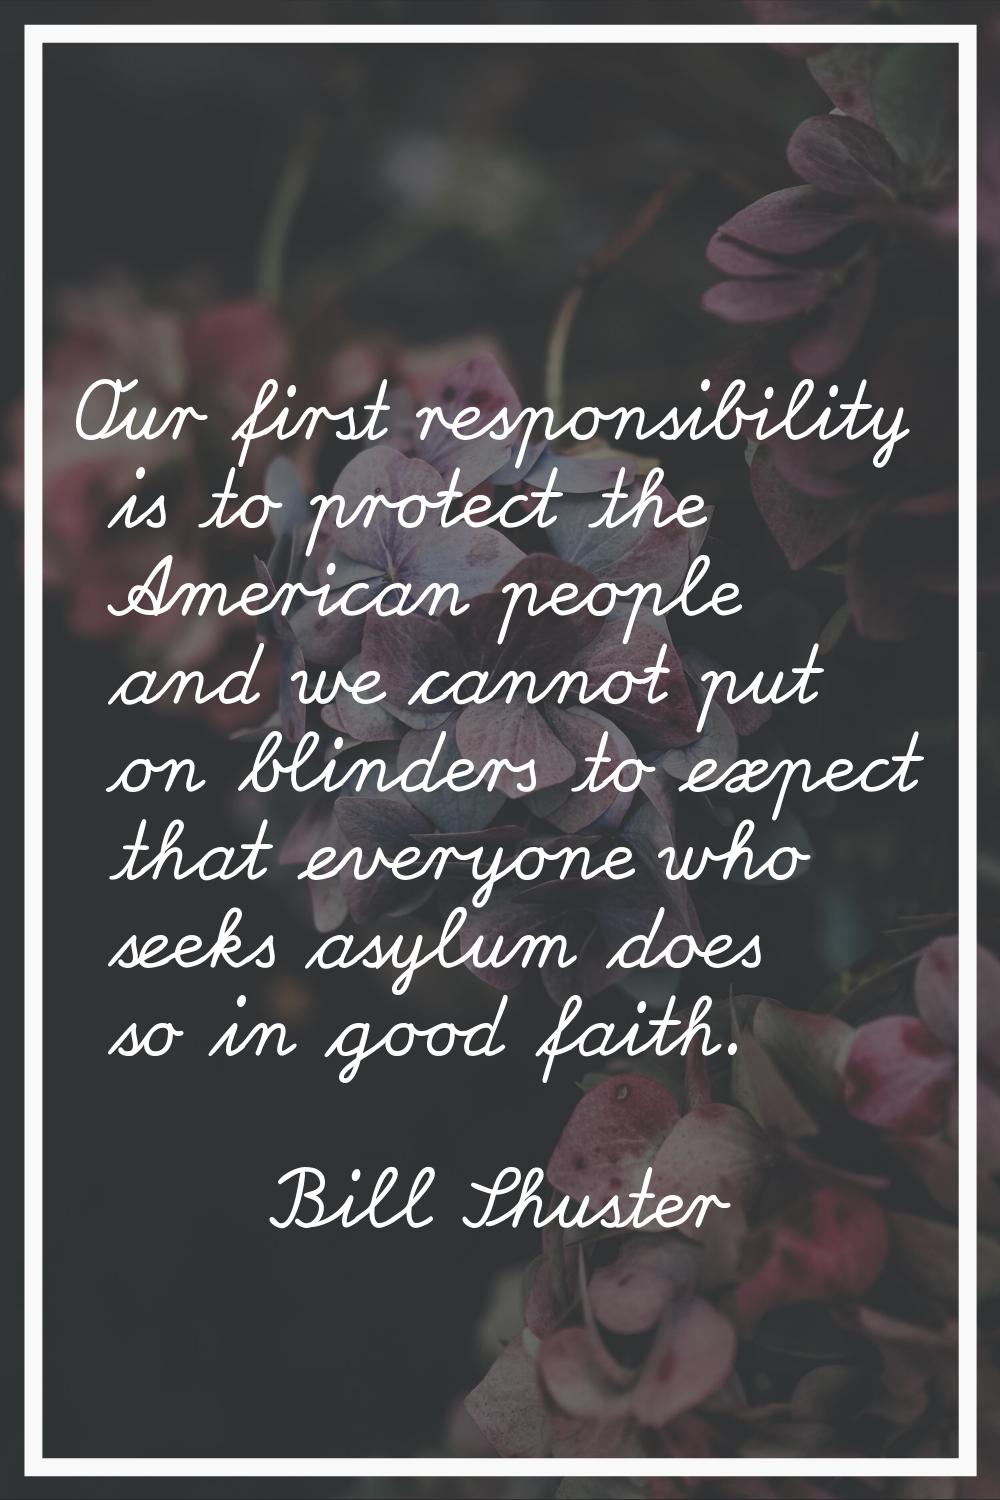 Our first responsibility is to protect the American people and we cannot put on blinders to expect 